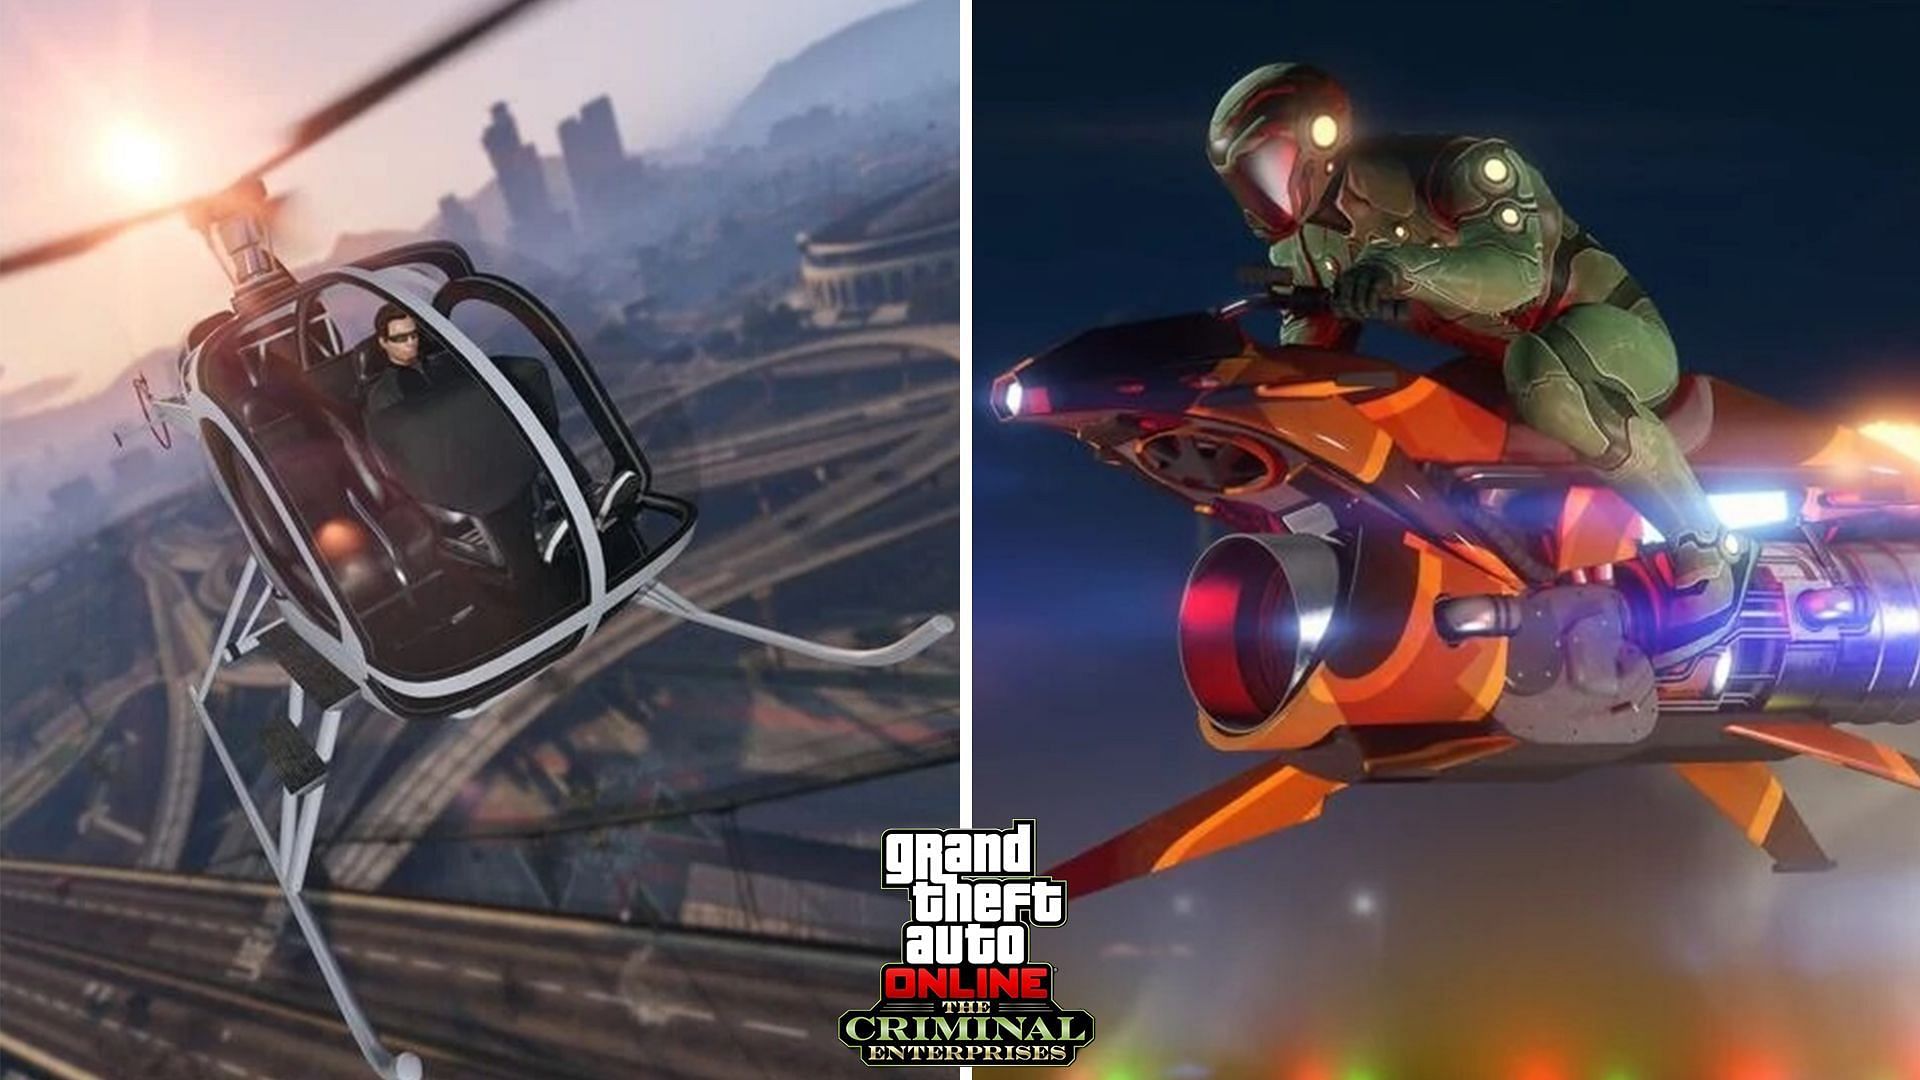 GTA Online players are delighted with the new changes coming to the game (Image via Rockstar Games)